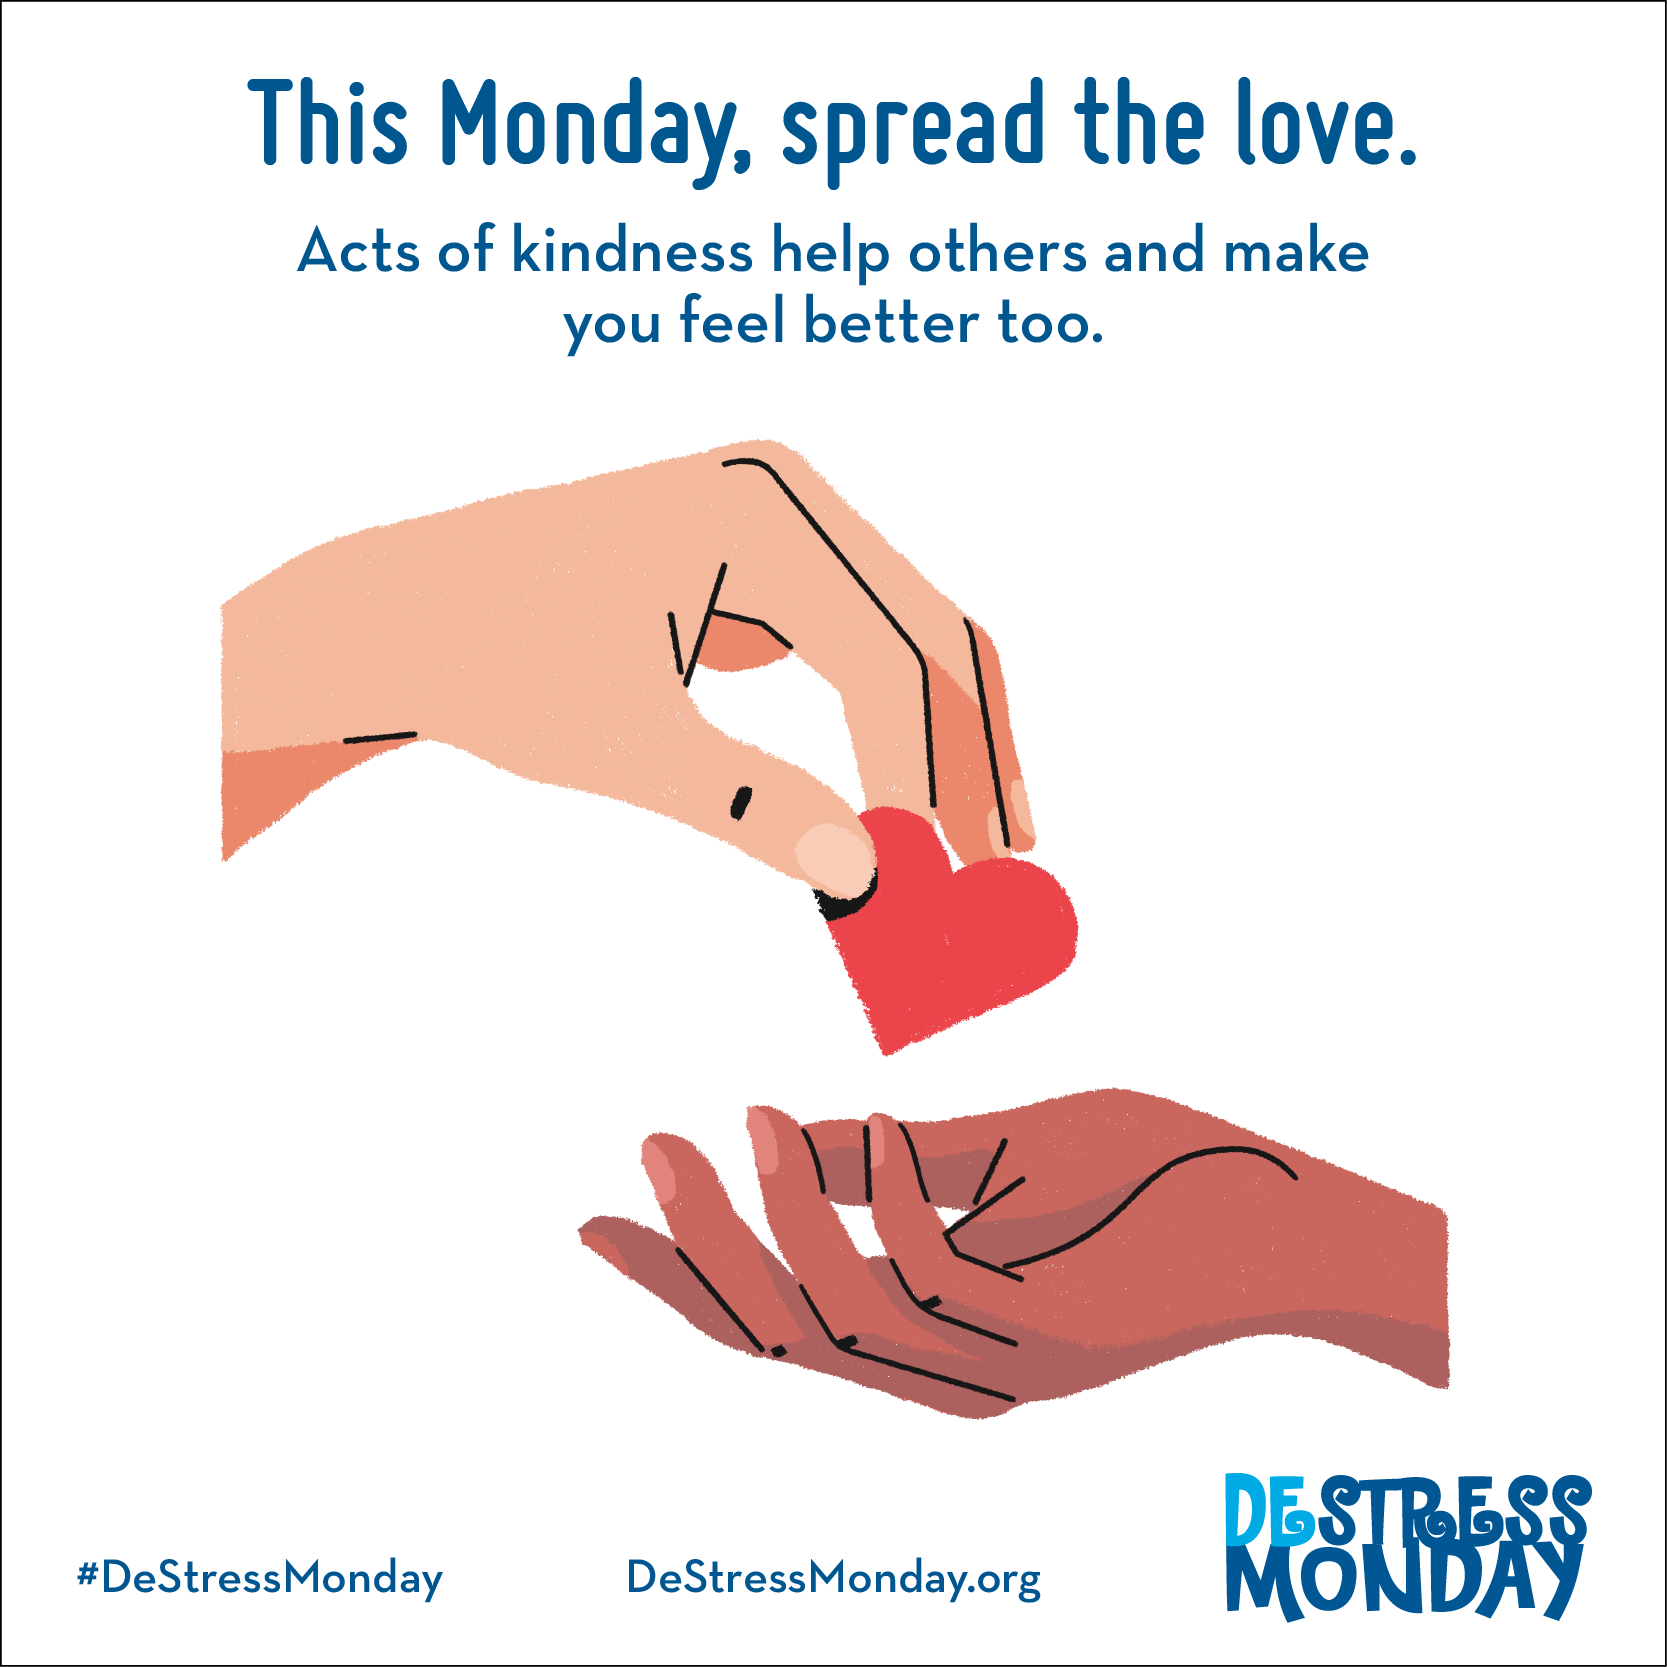 This Monday, spread the love. Acts of kindness help others and make you feel better too.